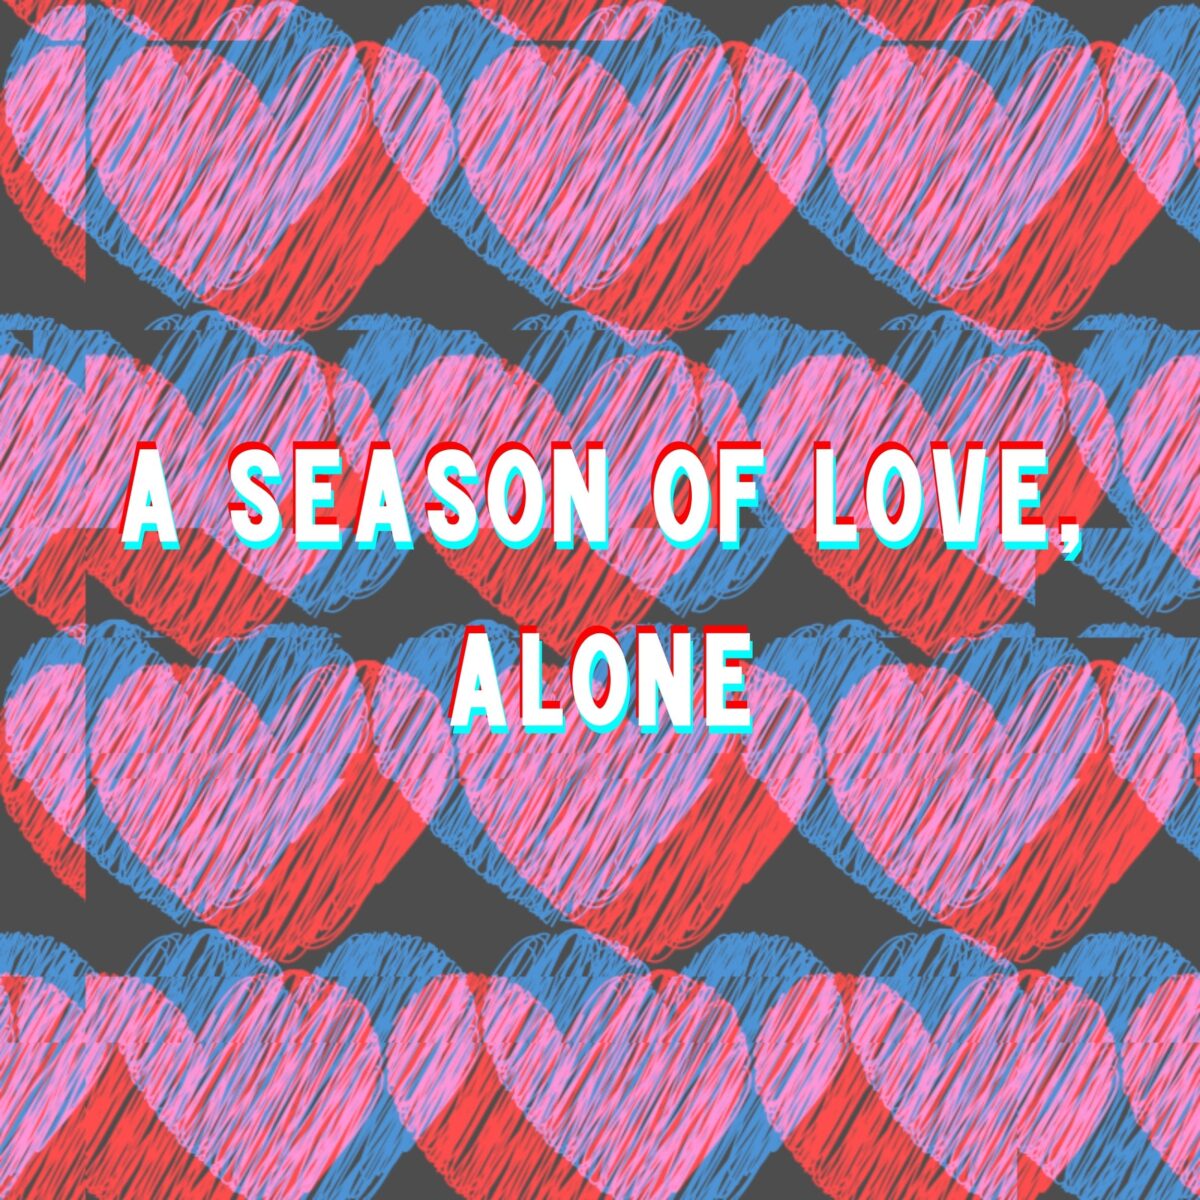 Glitchy looking pink red and blue hearts across a grey background. White text that reads "a season of love, alone." h